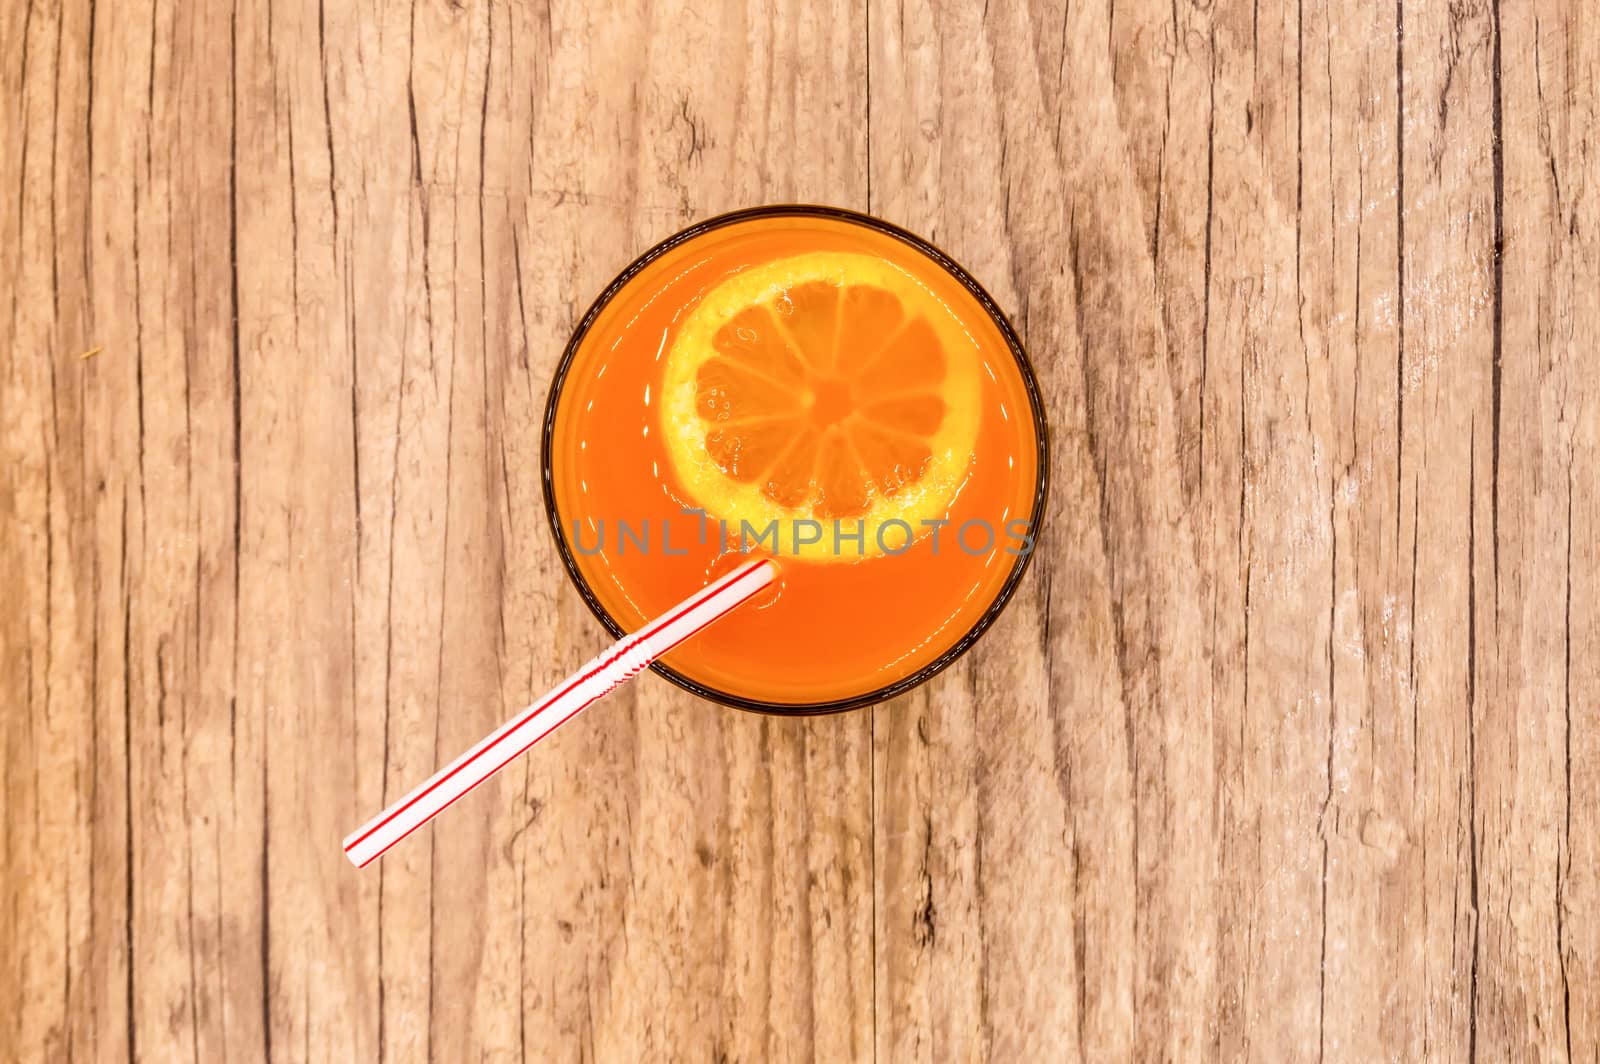 Multifruit juice in a glass with a straw viewed from above on a wooden background